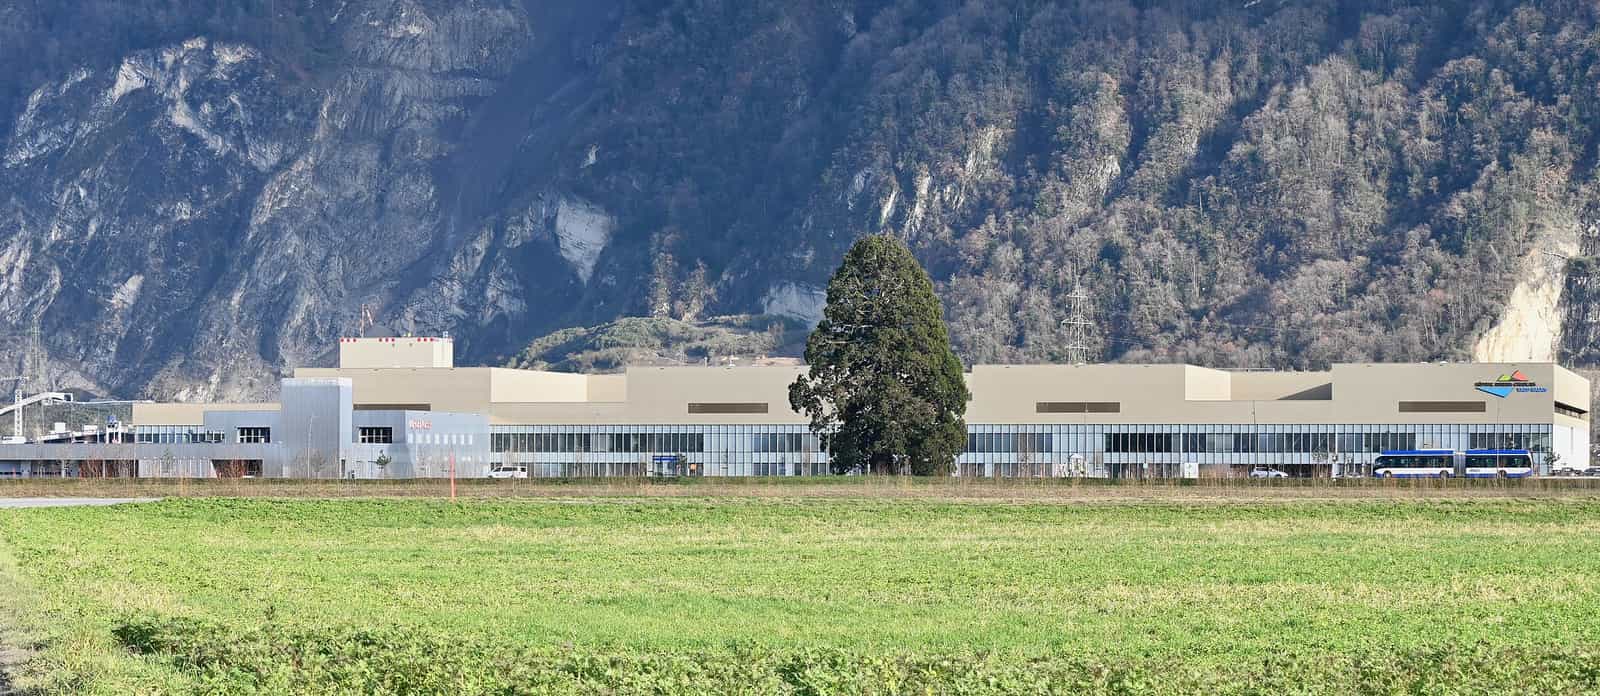 The Rennaz Hospital Centre of the Riviera-Chablais Hospital (HRC Rennaz) seen from Noville, Vaud.